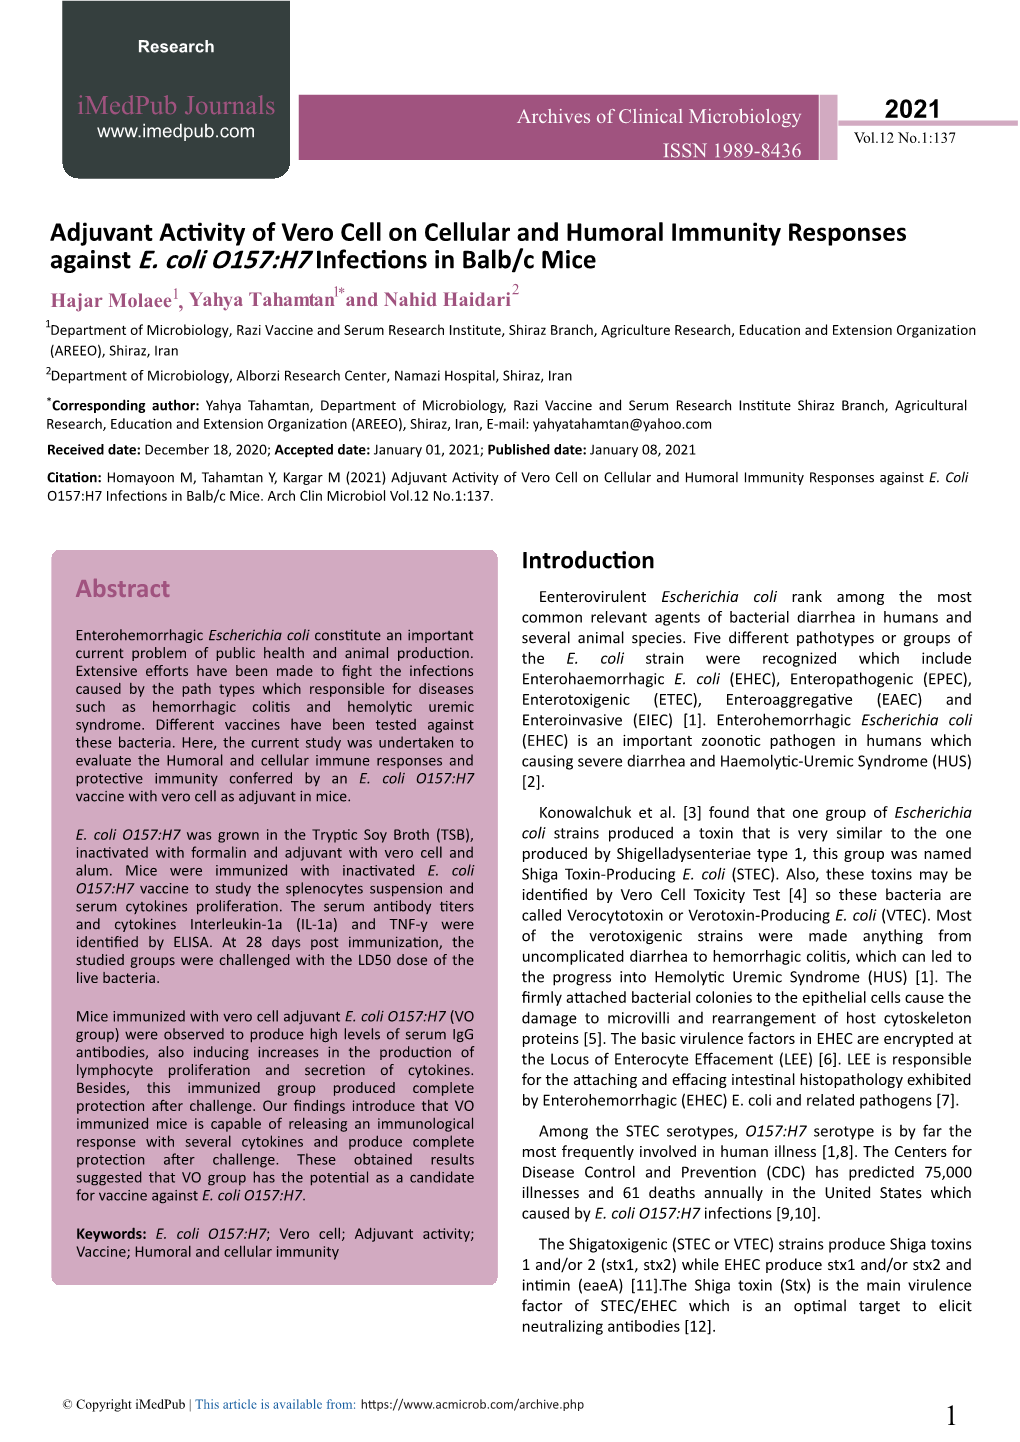 Adjuvant Activity of Vero Cell on Cellular and Humoral Immunity Responses Against E